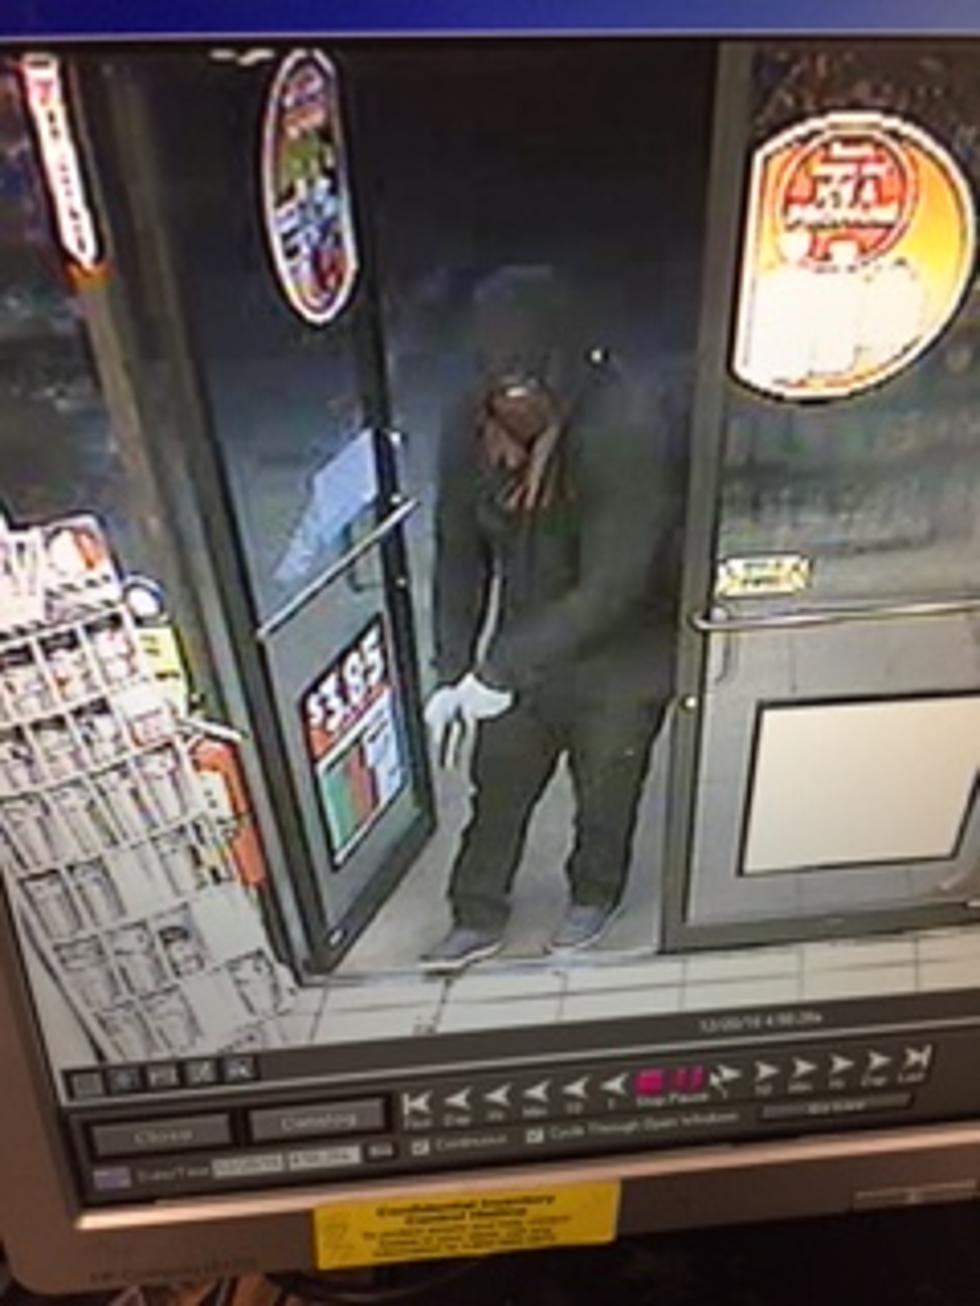 Suspect Sought In Armed Robbery Of A Family Dollar